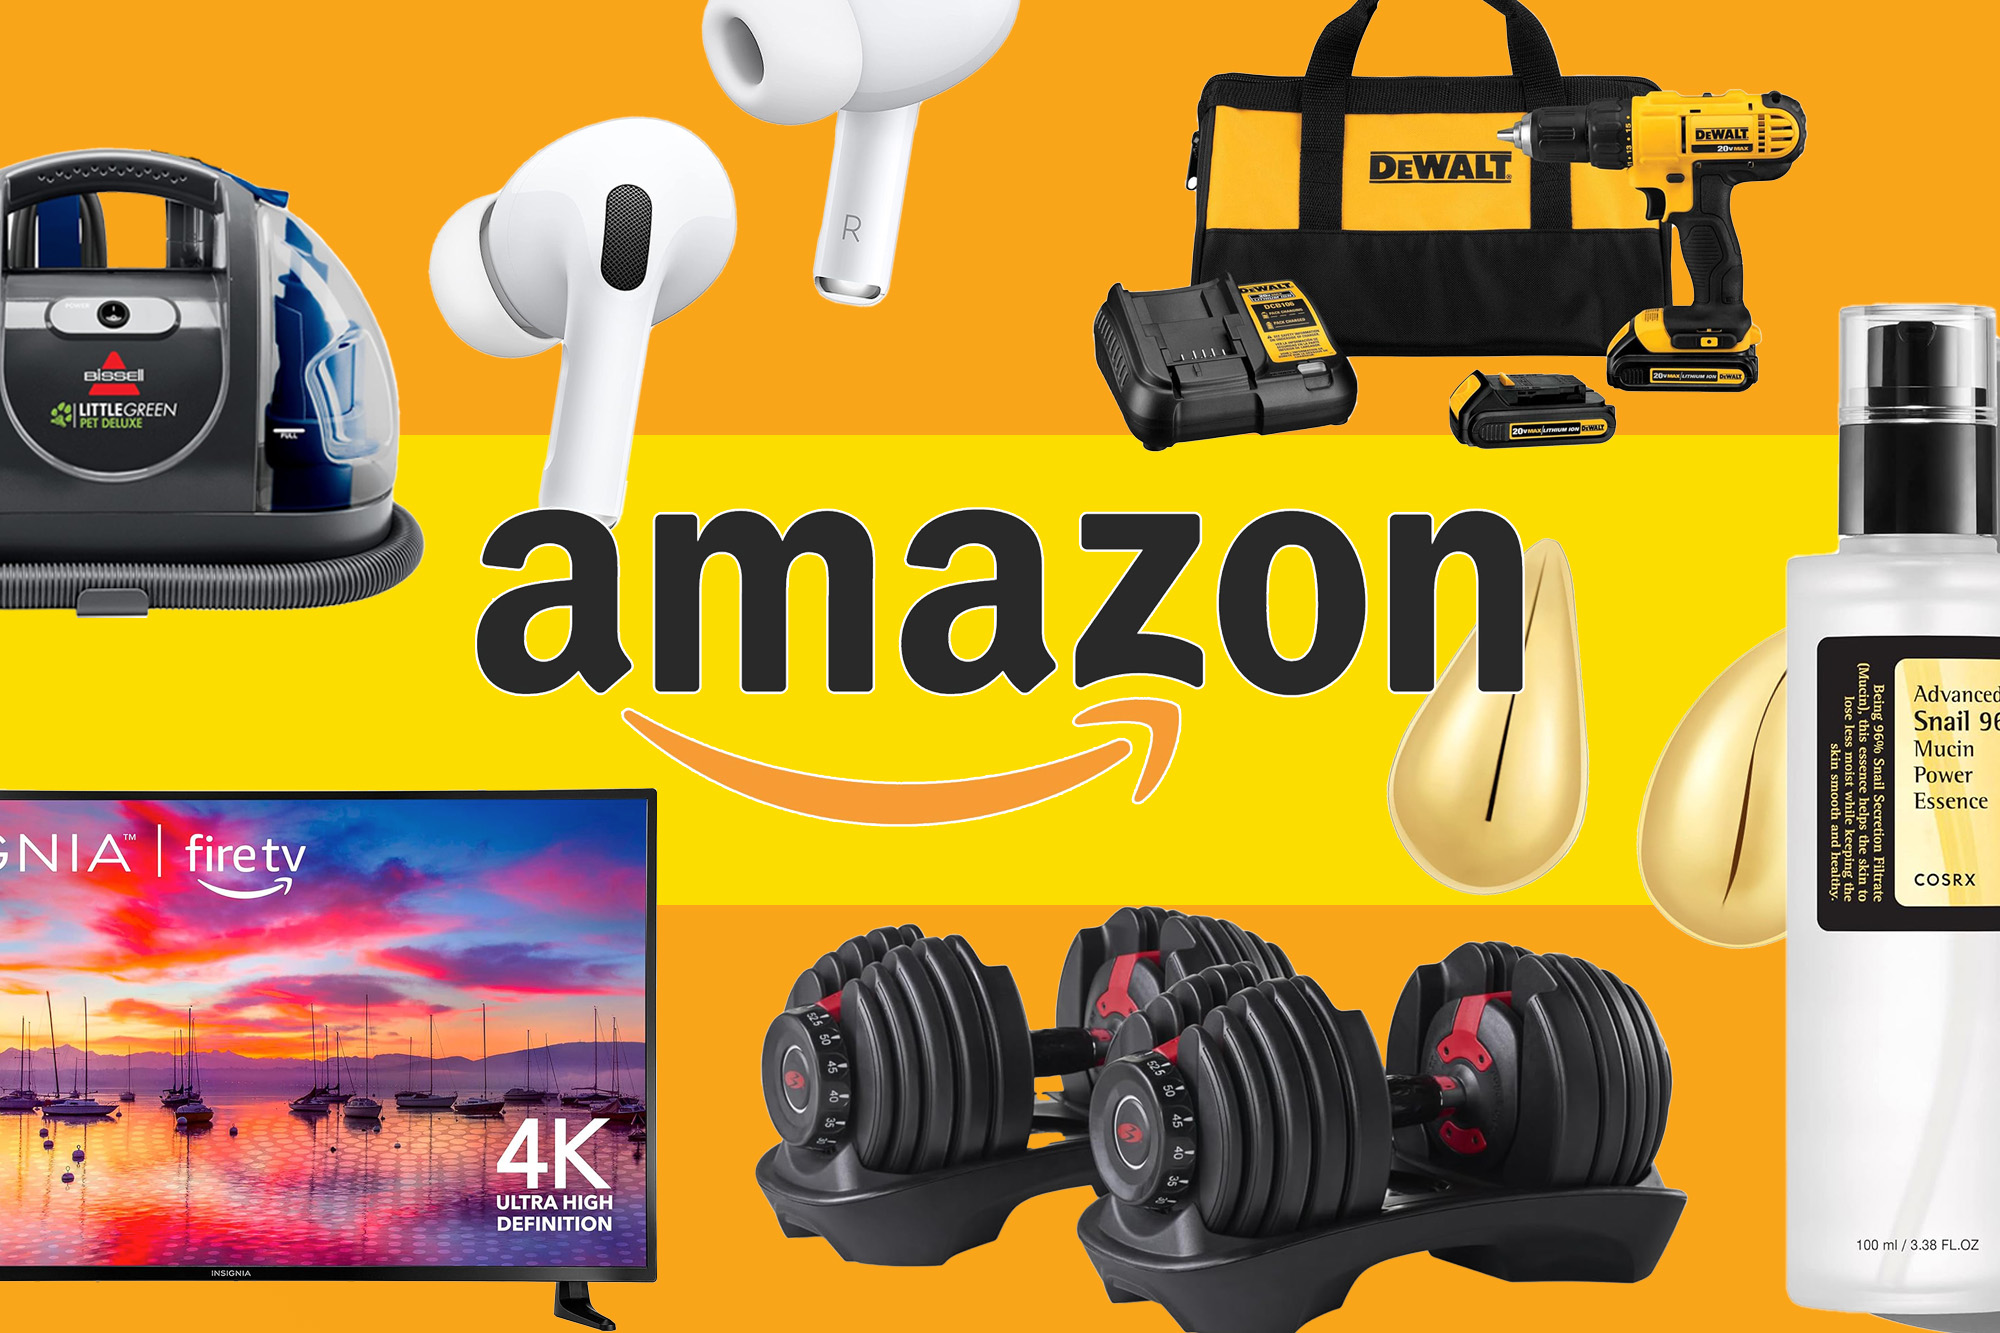 We just spotted 21 of Amazon's best deals of the week ahead: AirPods, DeWalt, more